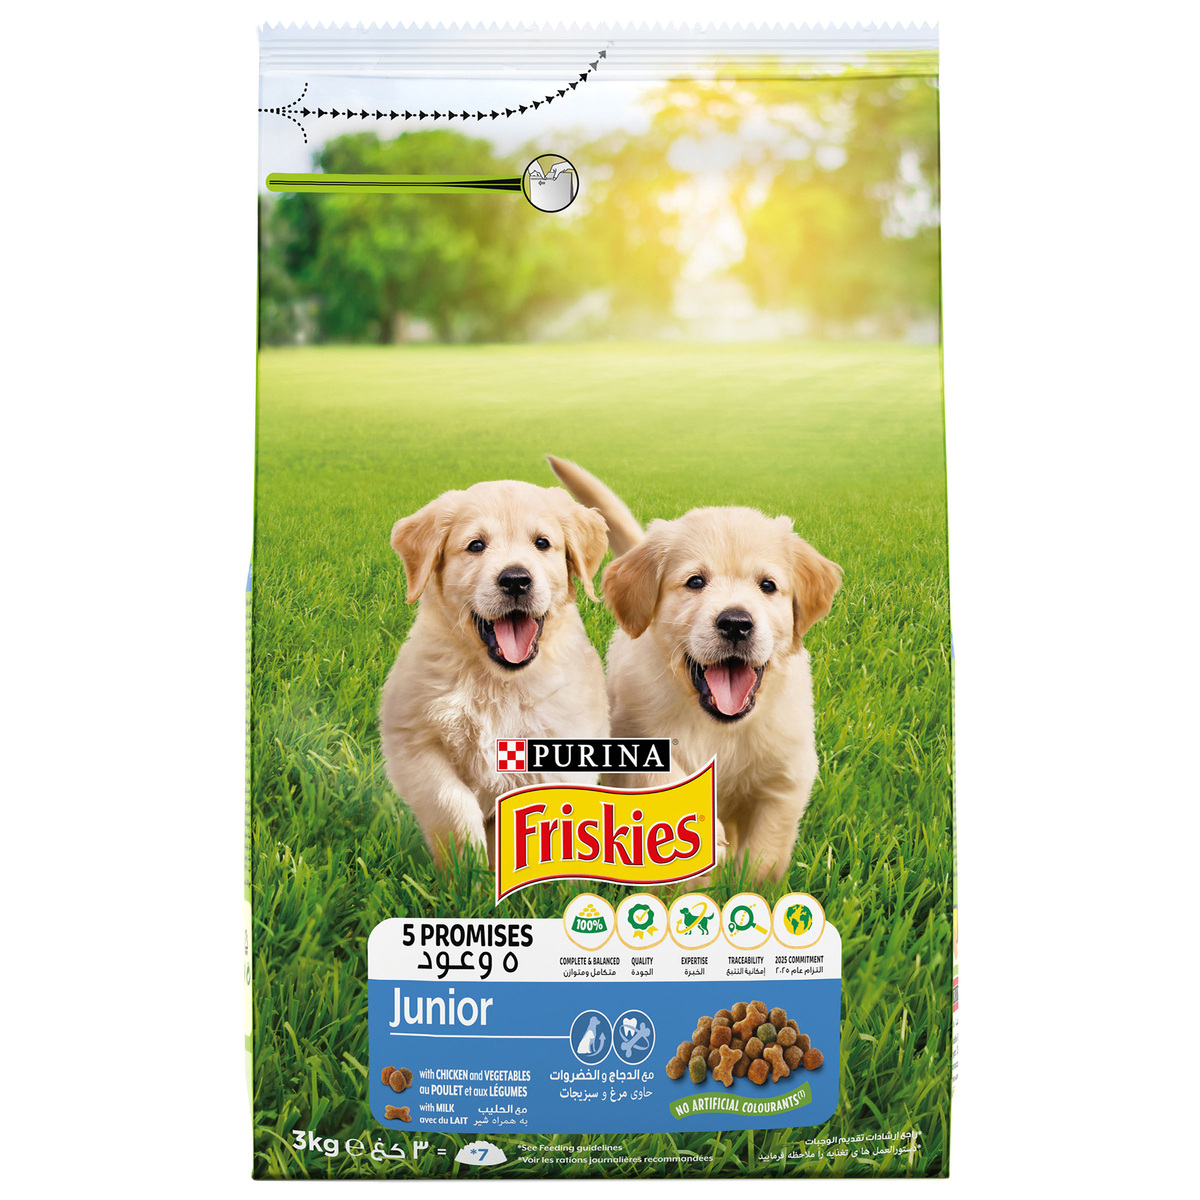 Purina Friskies Junior Dog Food with Chicken and Vegetables 3 kg